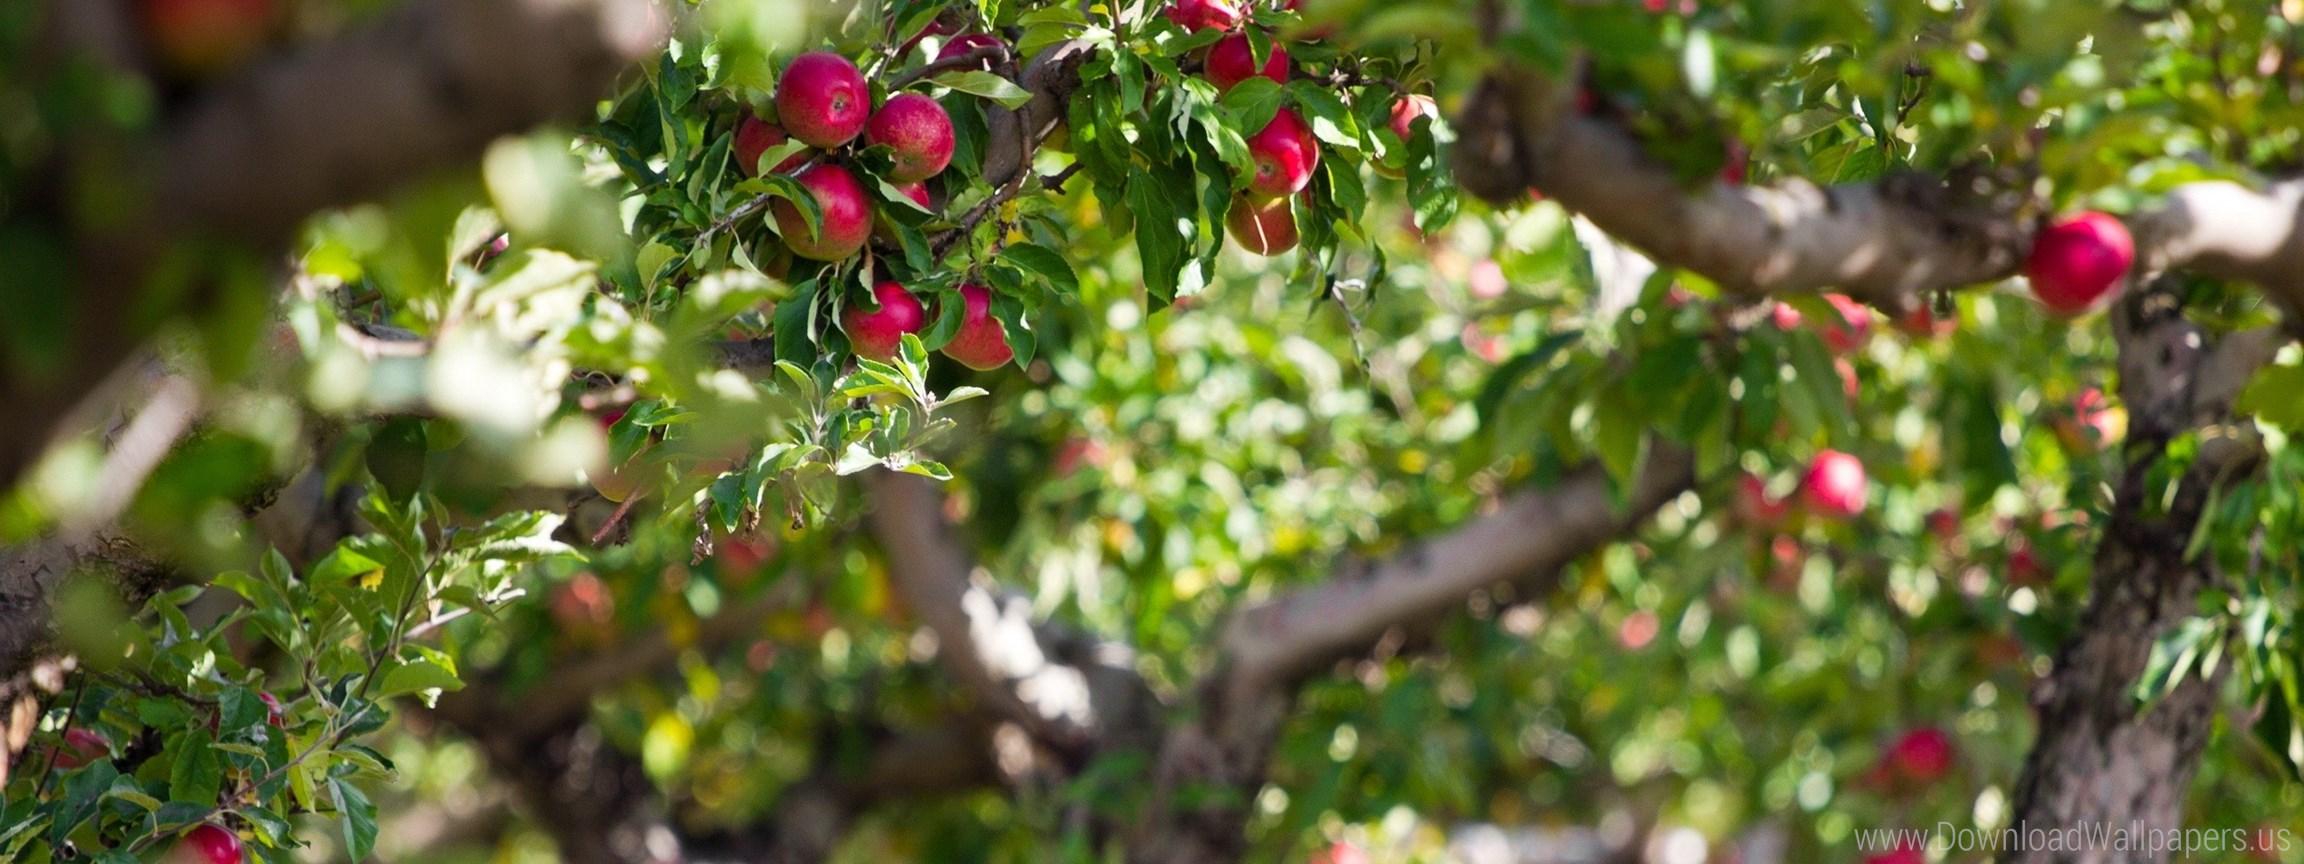 Download Dual Screen Wide 2304x864, Apples, Branches, Tree